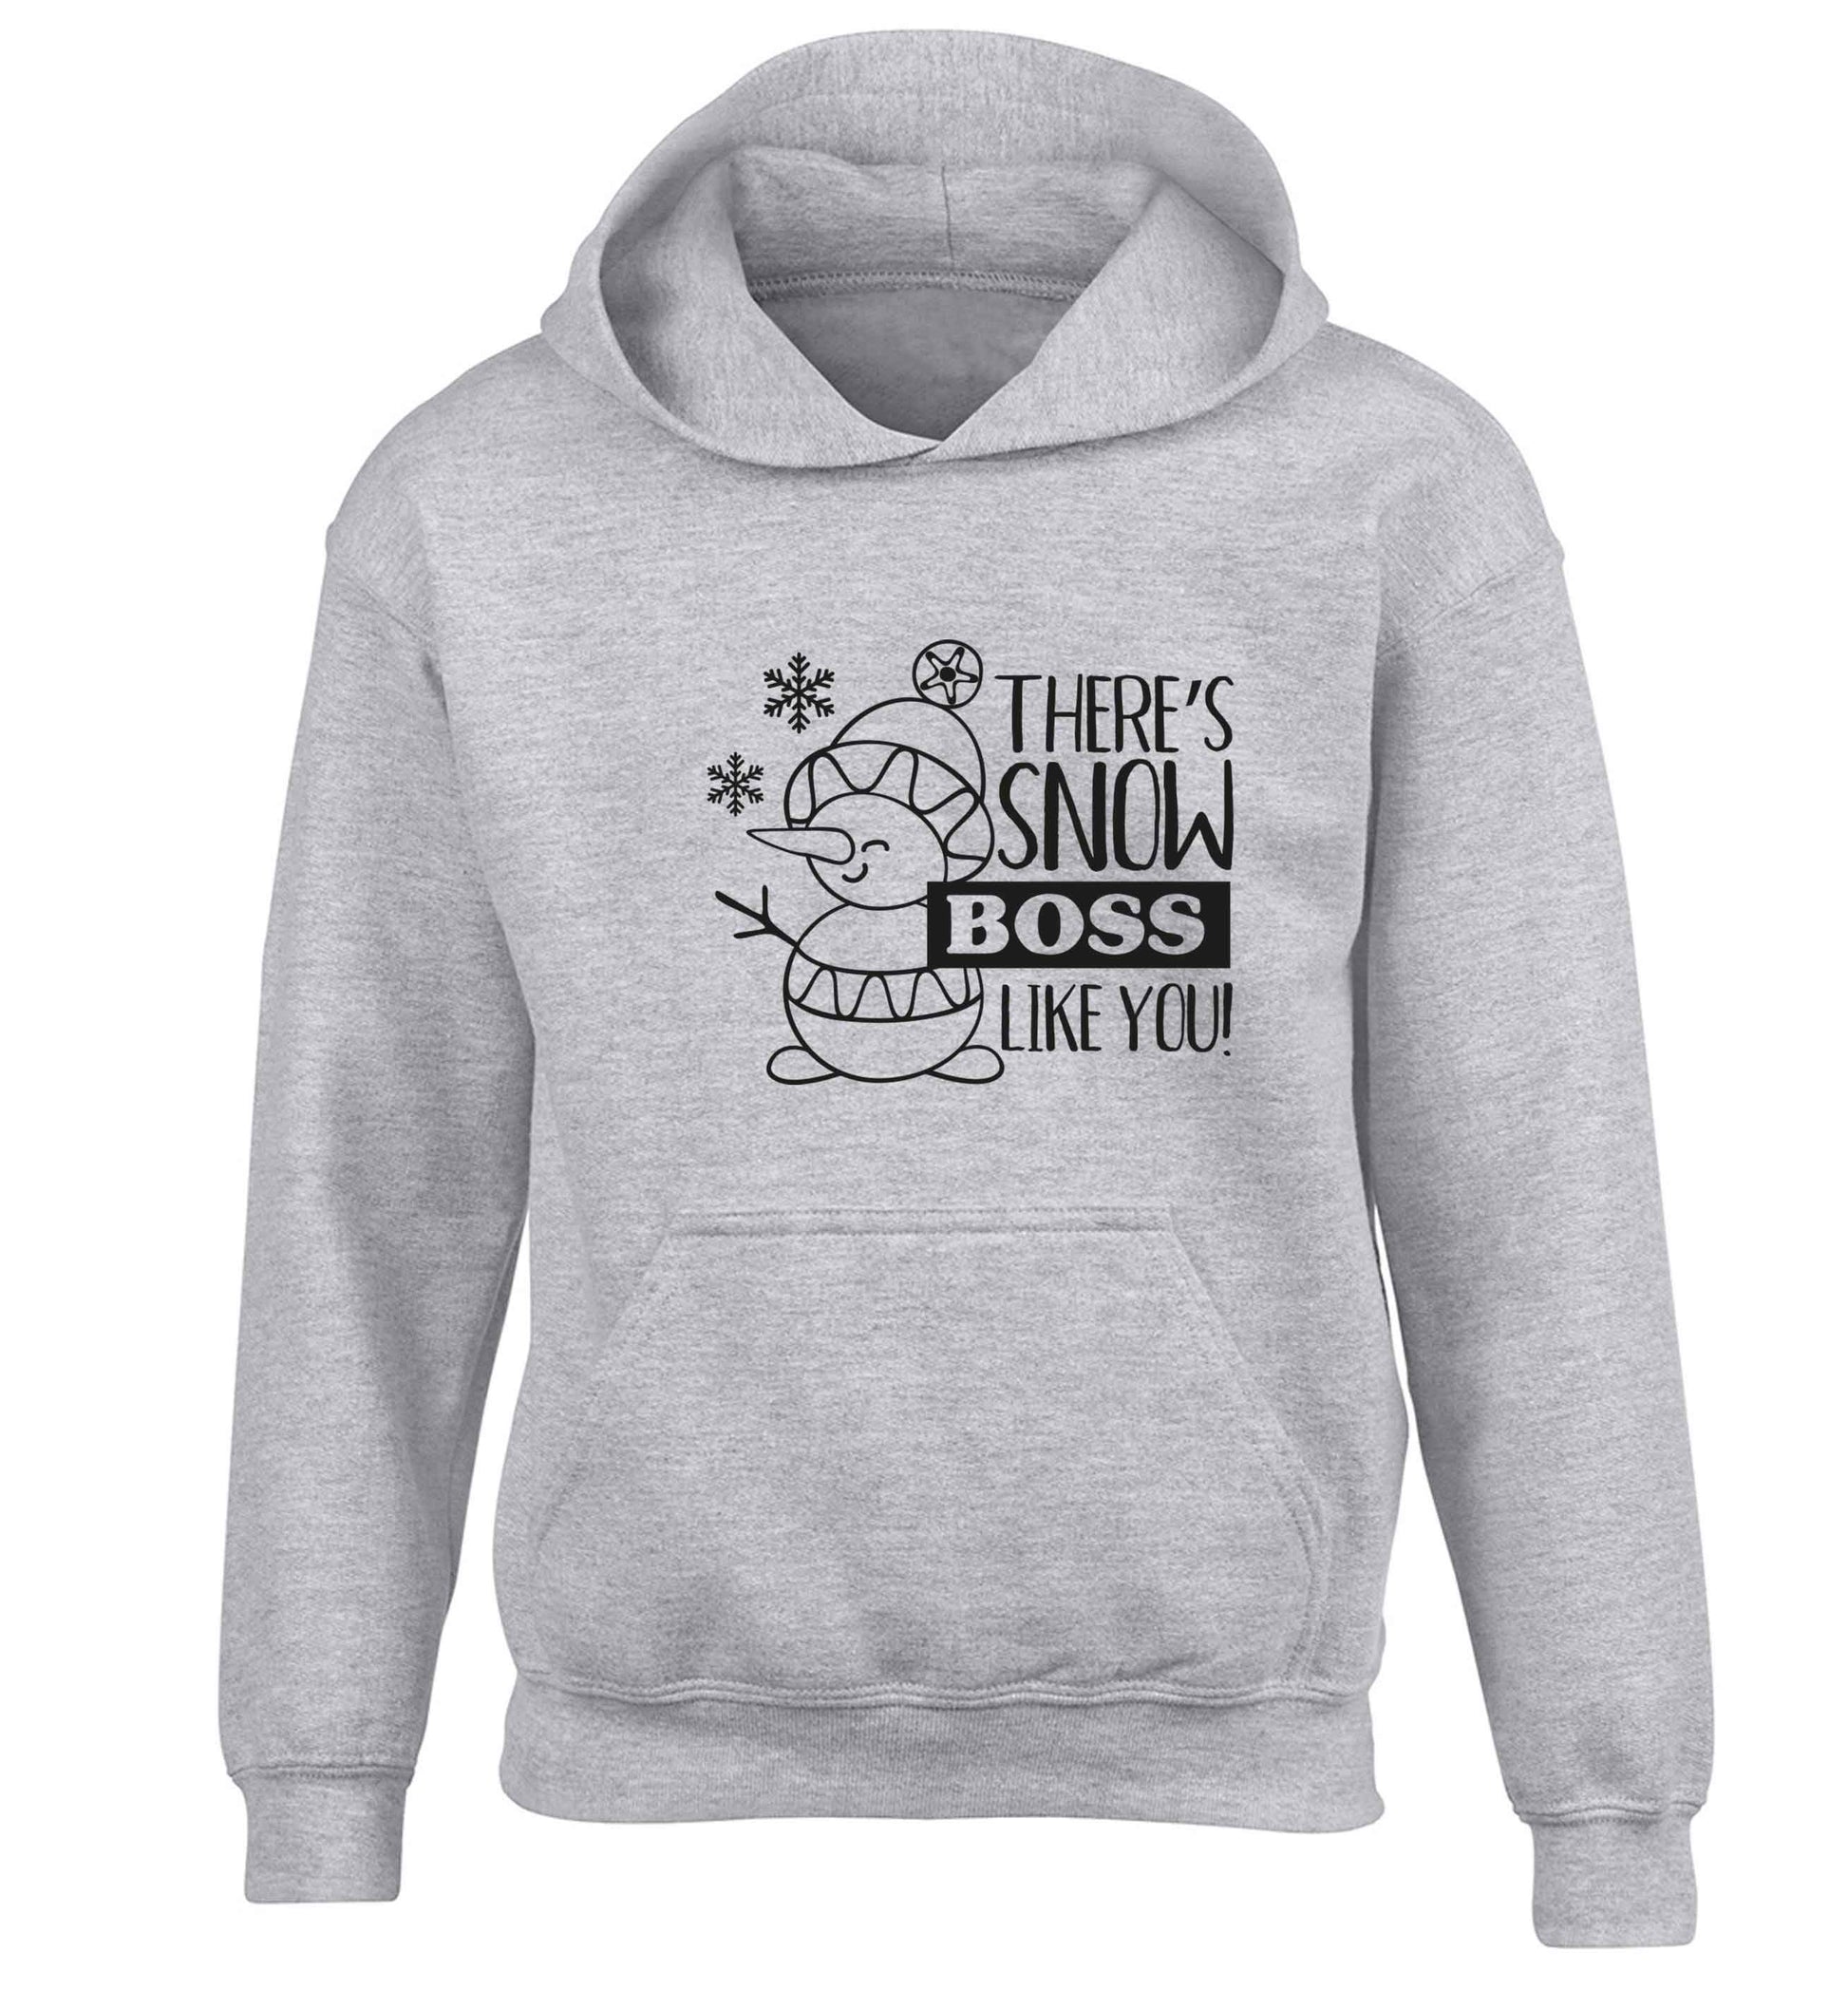 There's snow boss like you children's grey hoodie 12-13 Years